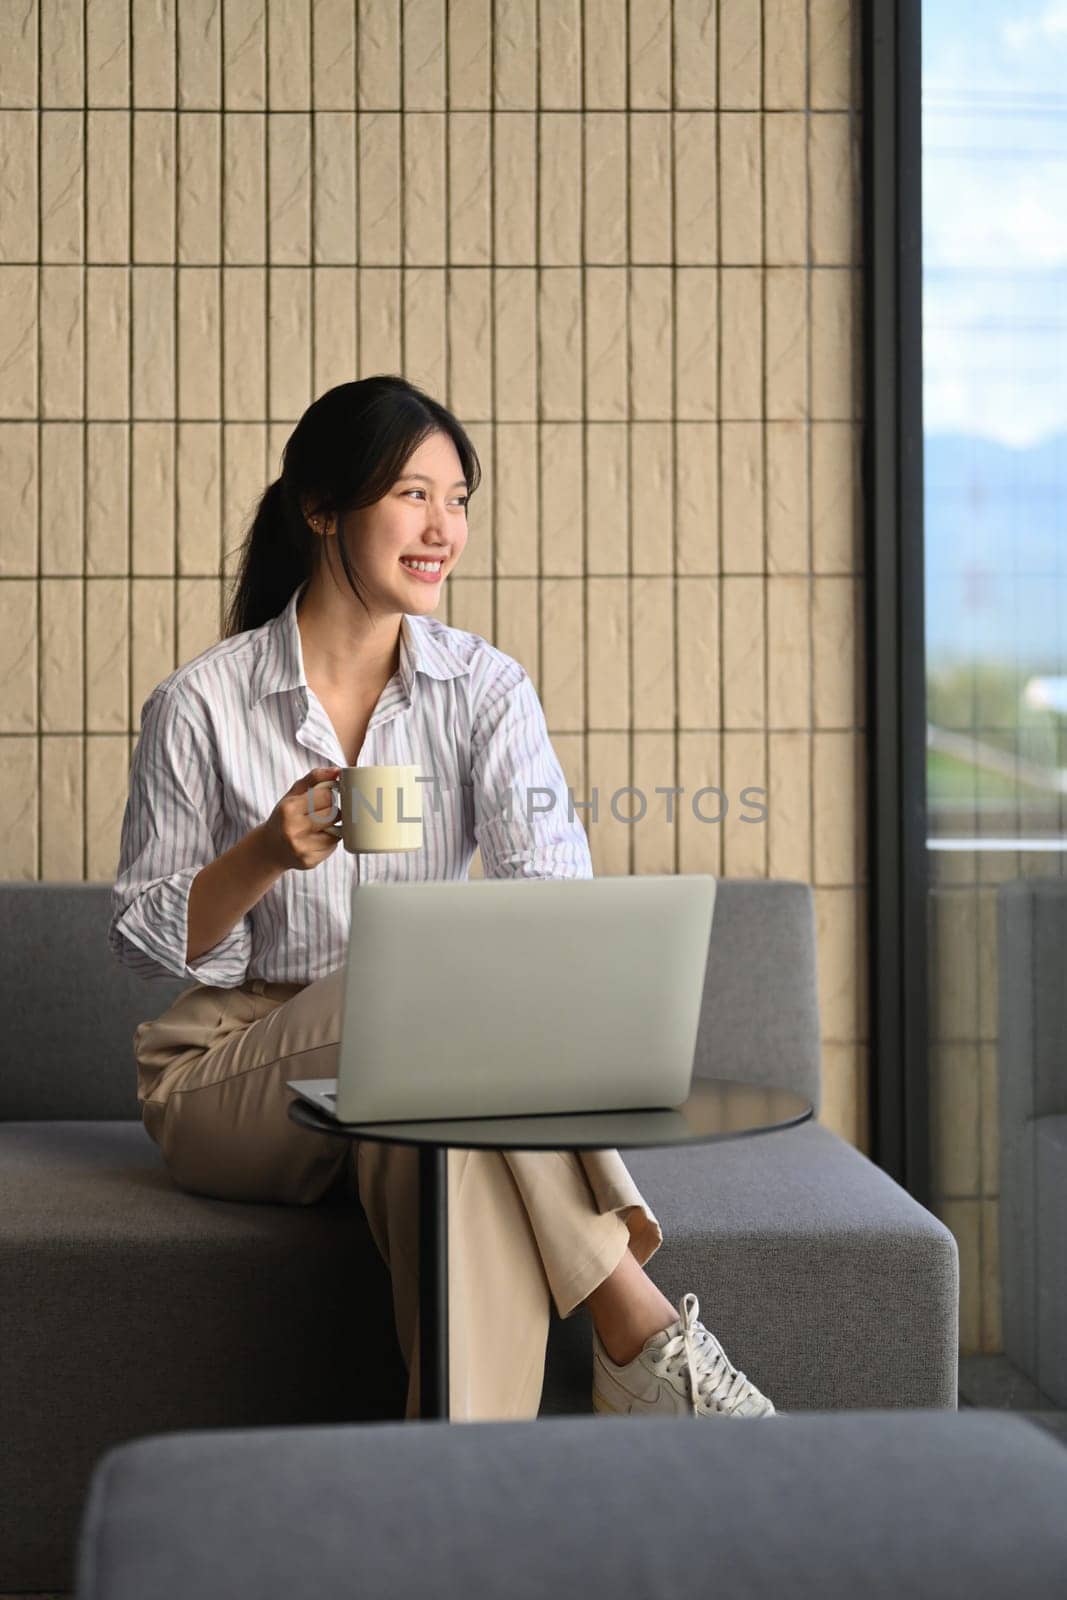 Portrait of thoughtful young businesswoman holding a cup of coffee looking out of window.